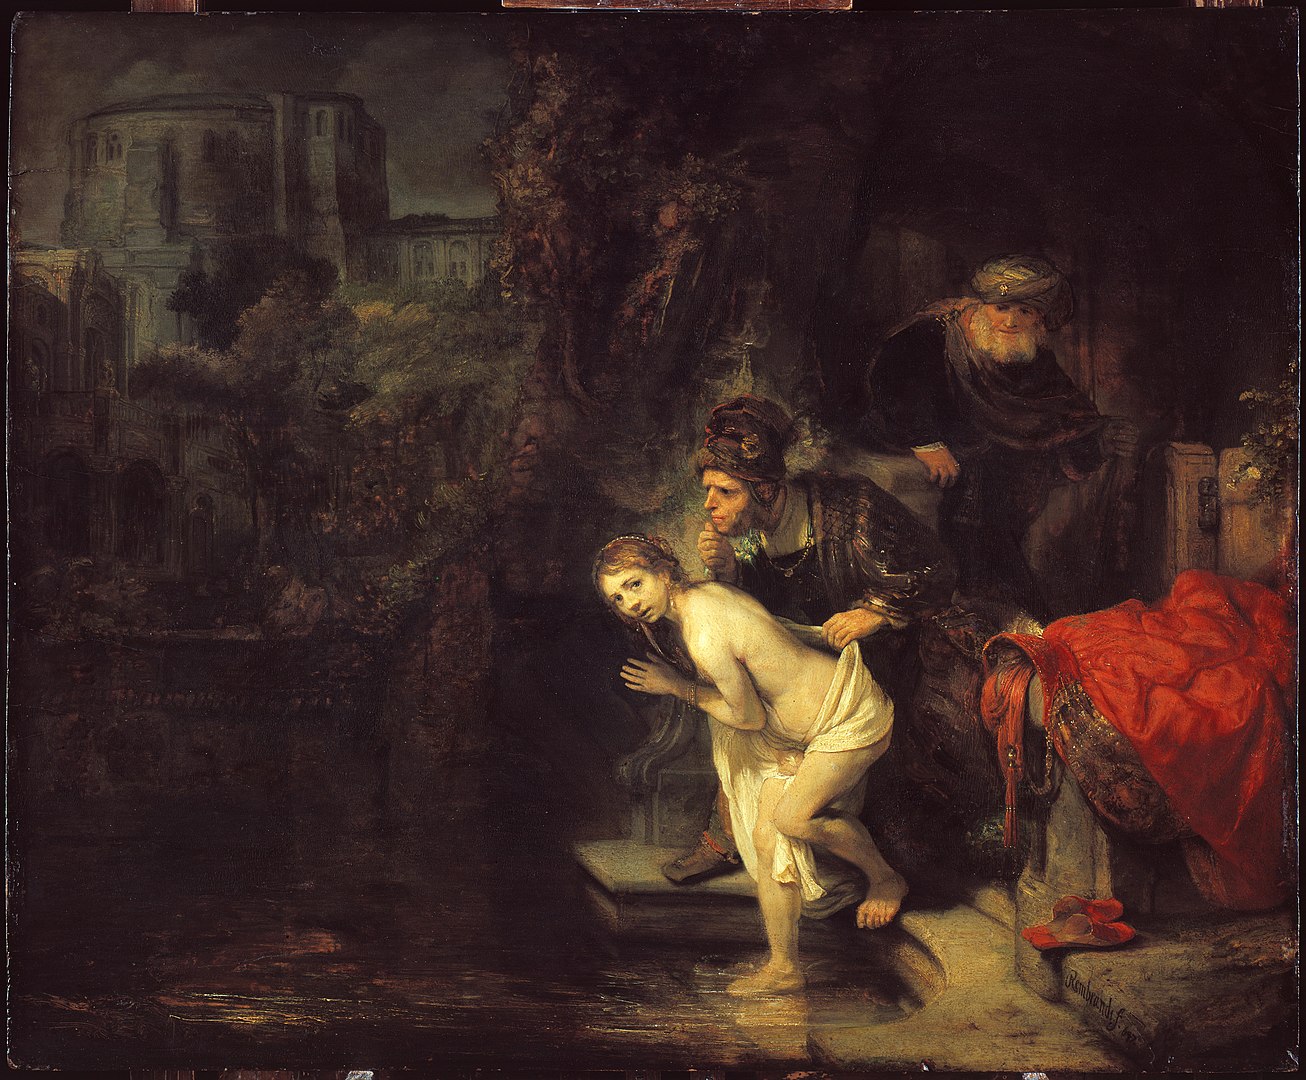 Rembrandt - Susanna and the Elders